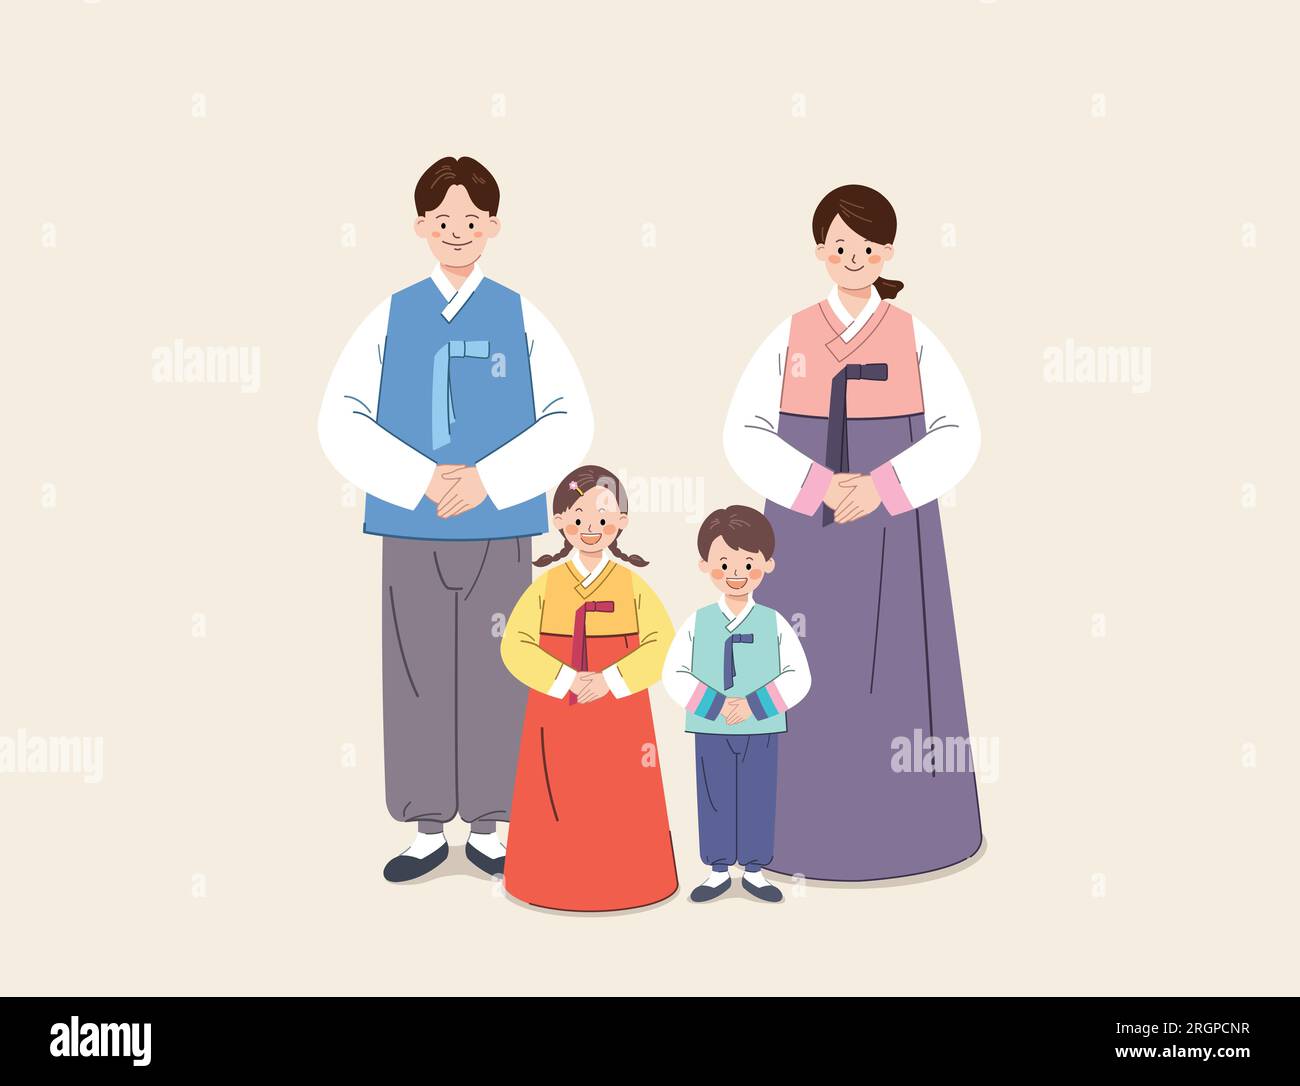 Korean family standing together wearing traditional hanbok. Stock Vector